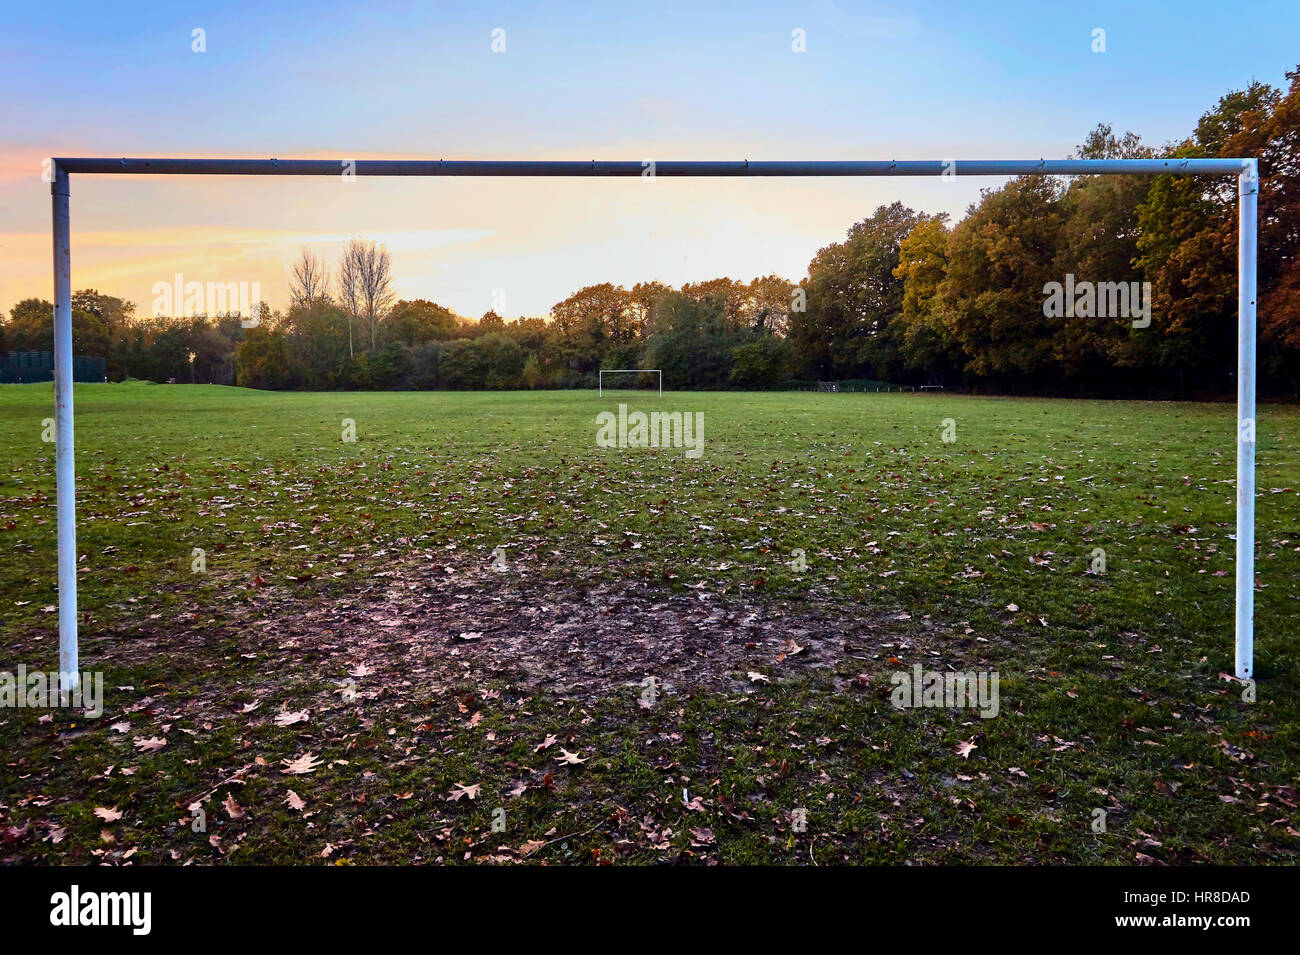 Soccer field at sunset in autumn or fall, mud and leaves on the ground Stock Photo